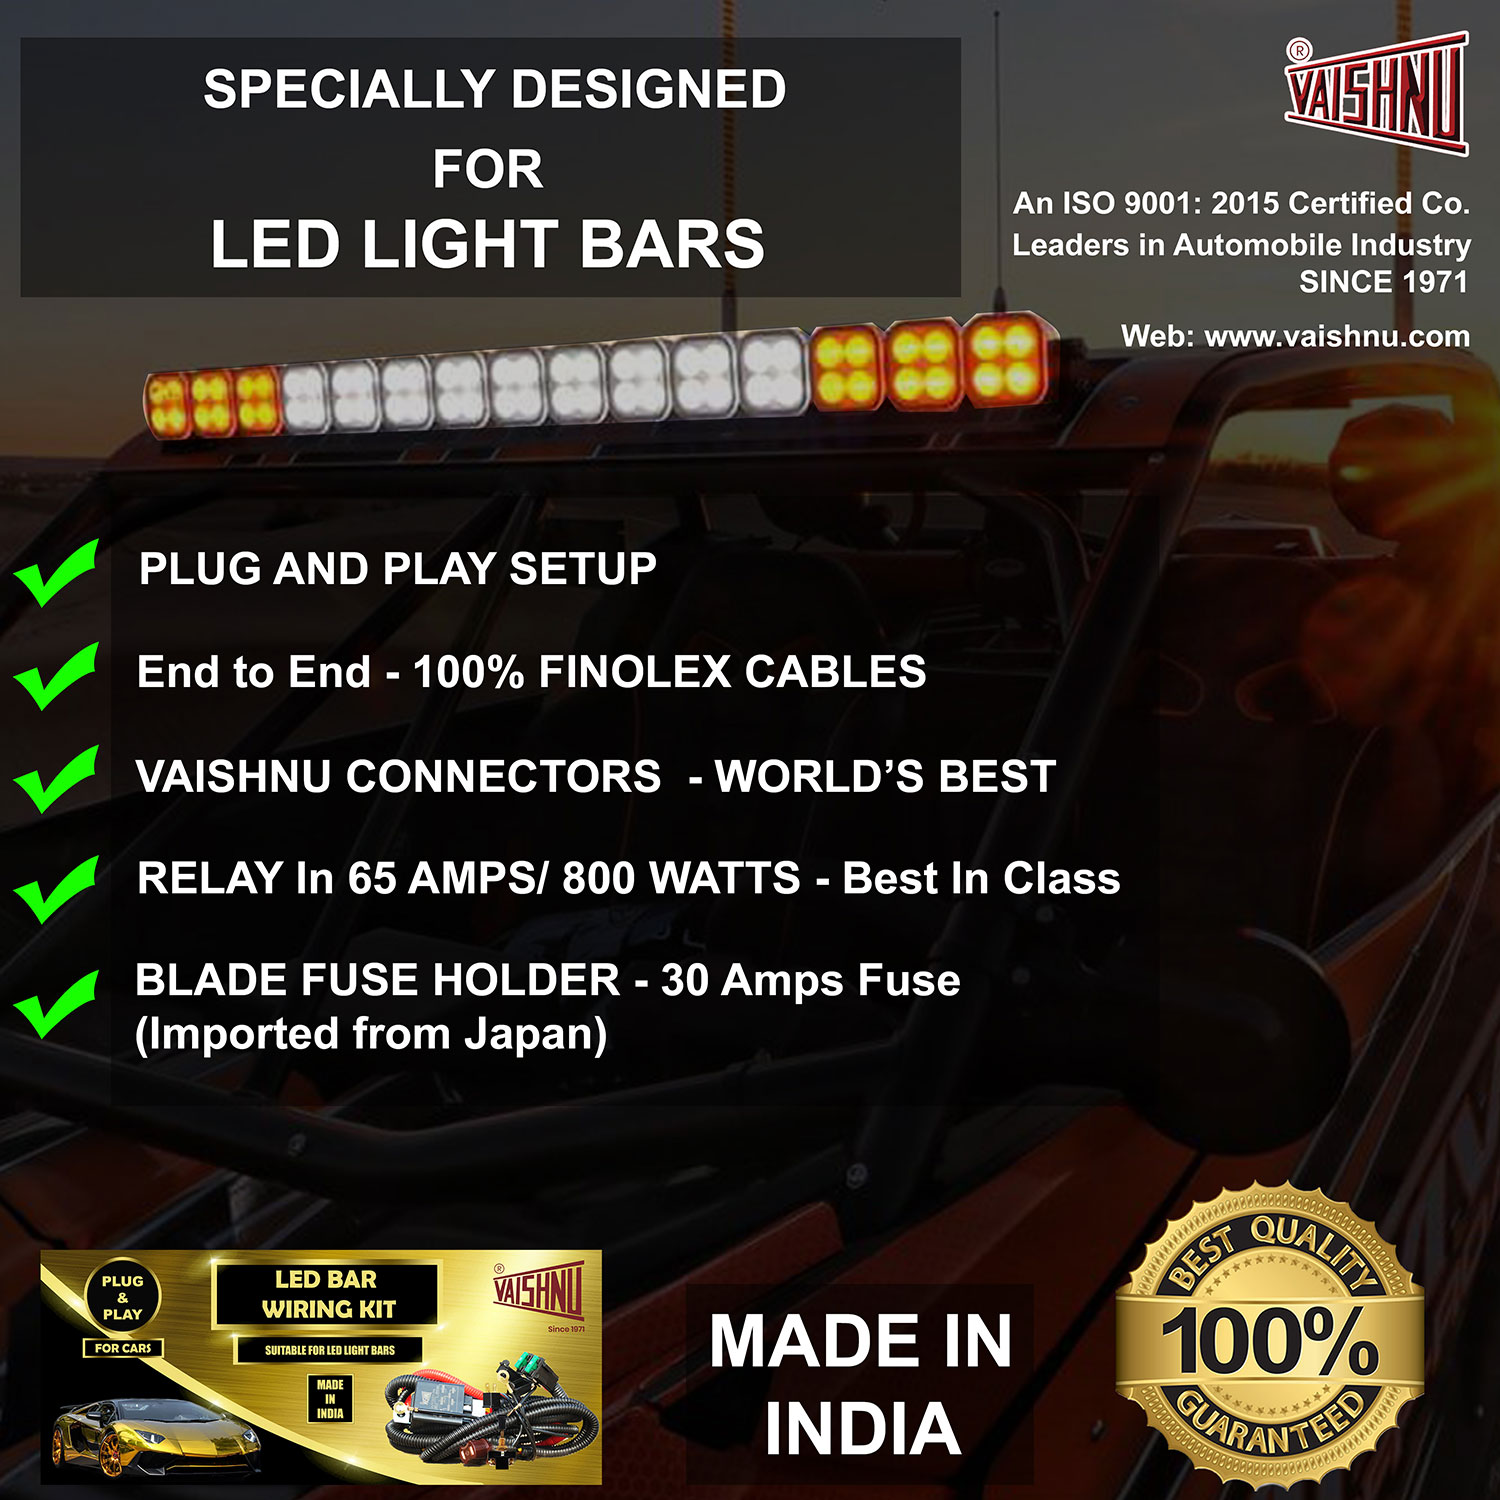 LED LIGHT BAR WIRING HARNESS for Cars/SUV's